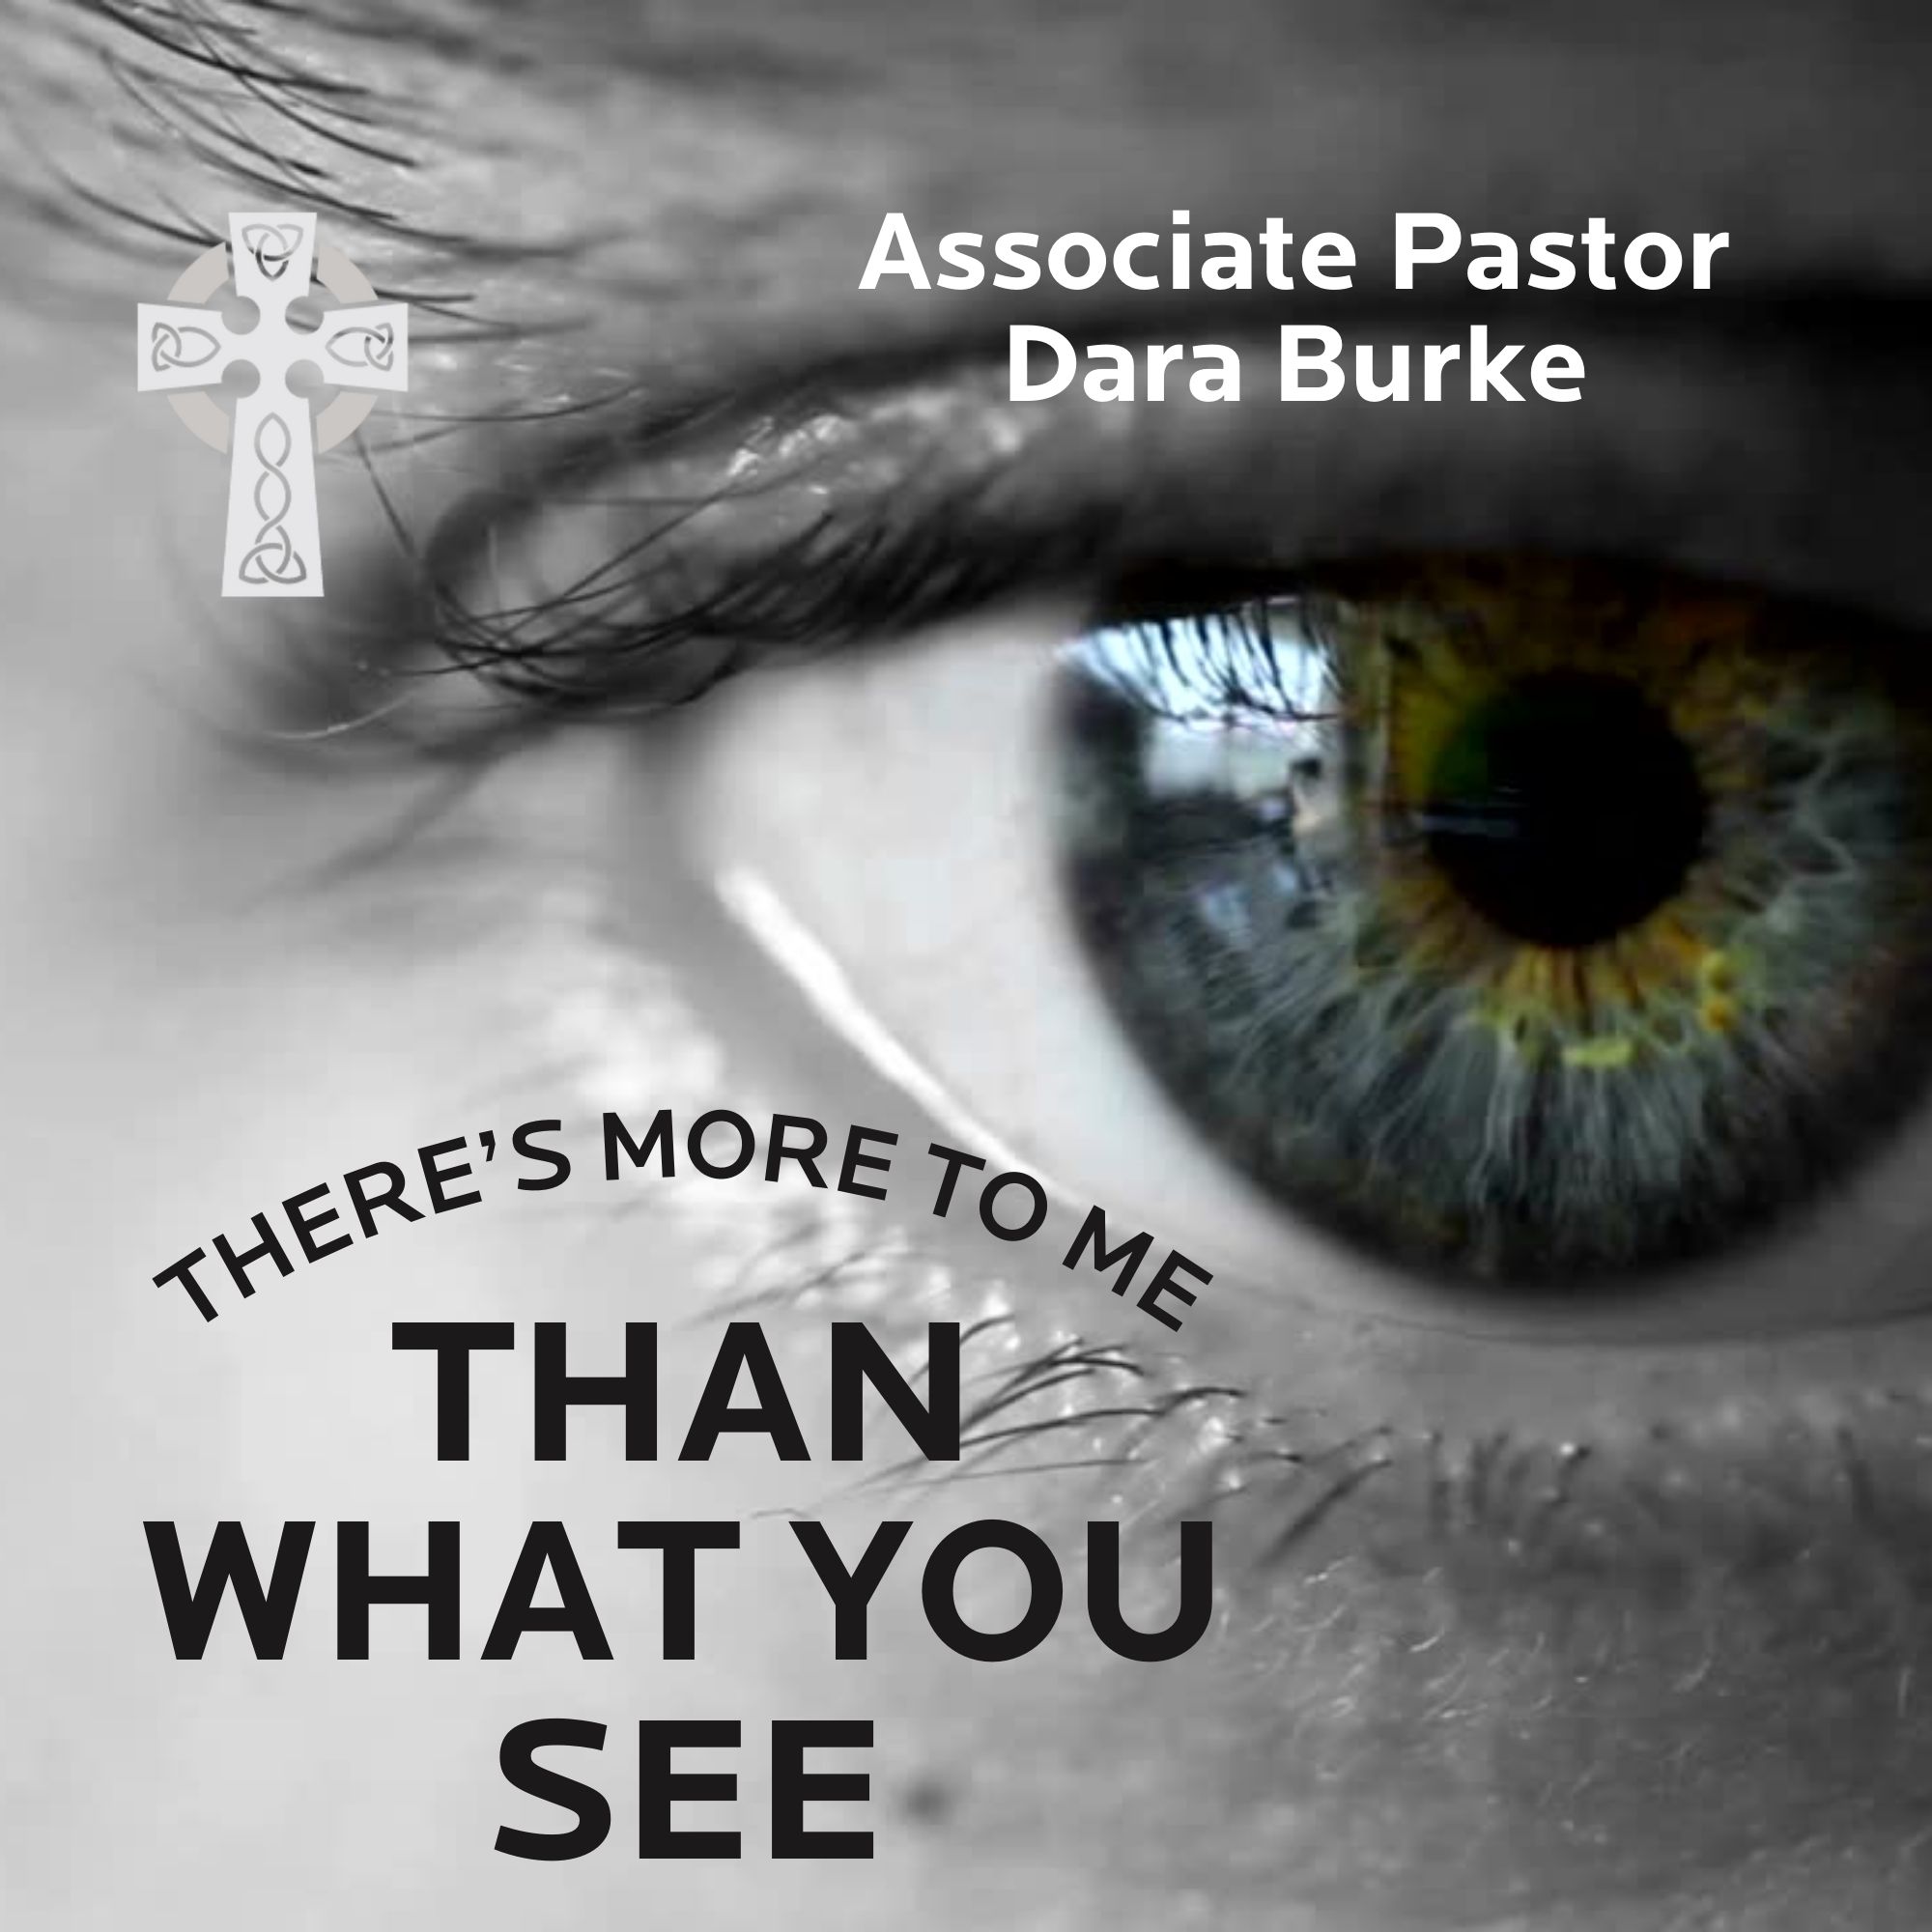 There's More to Me Than What You See - Associate Pastor Dara Burke